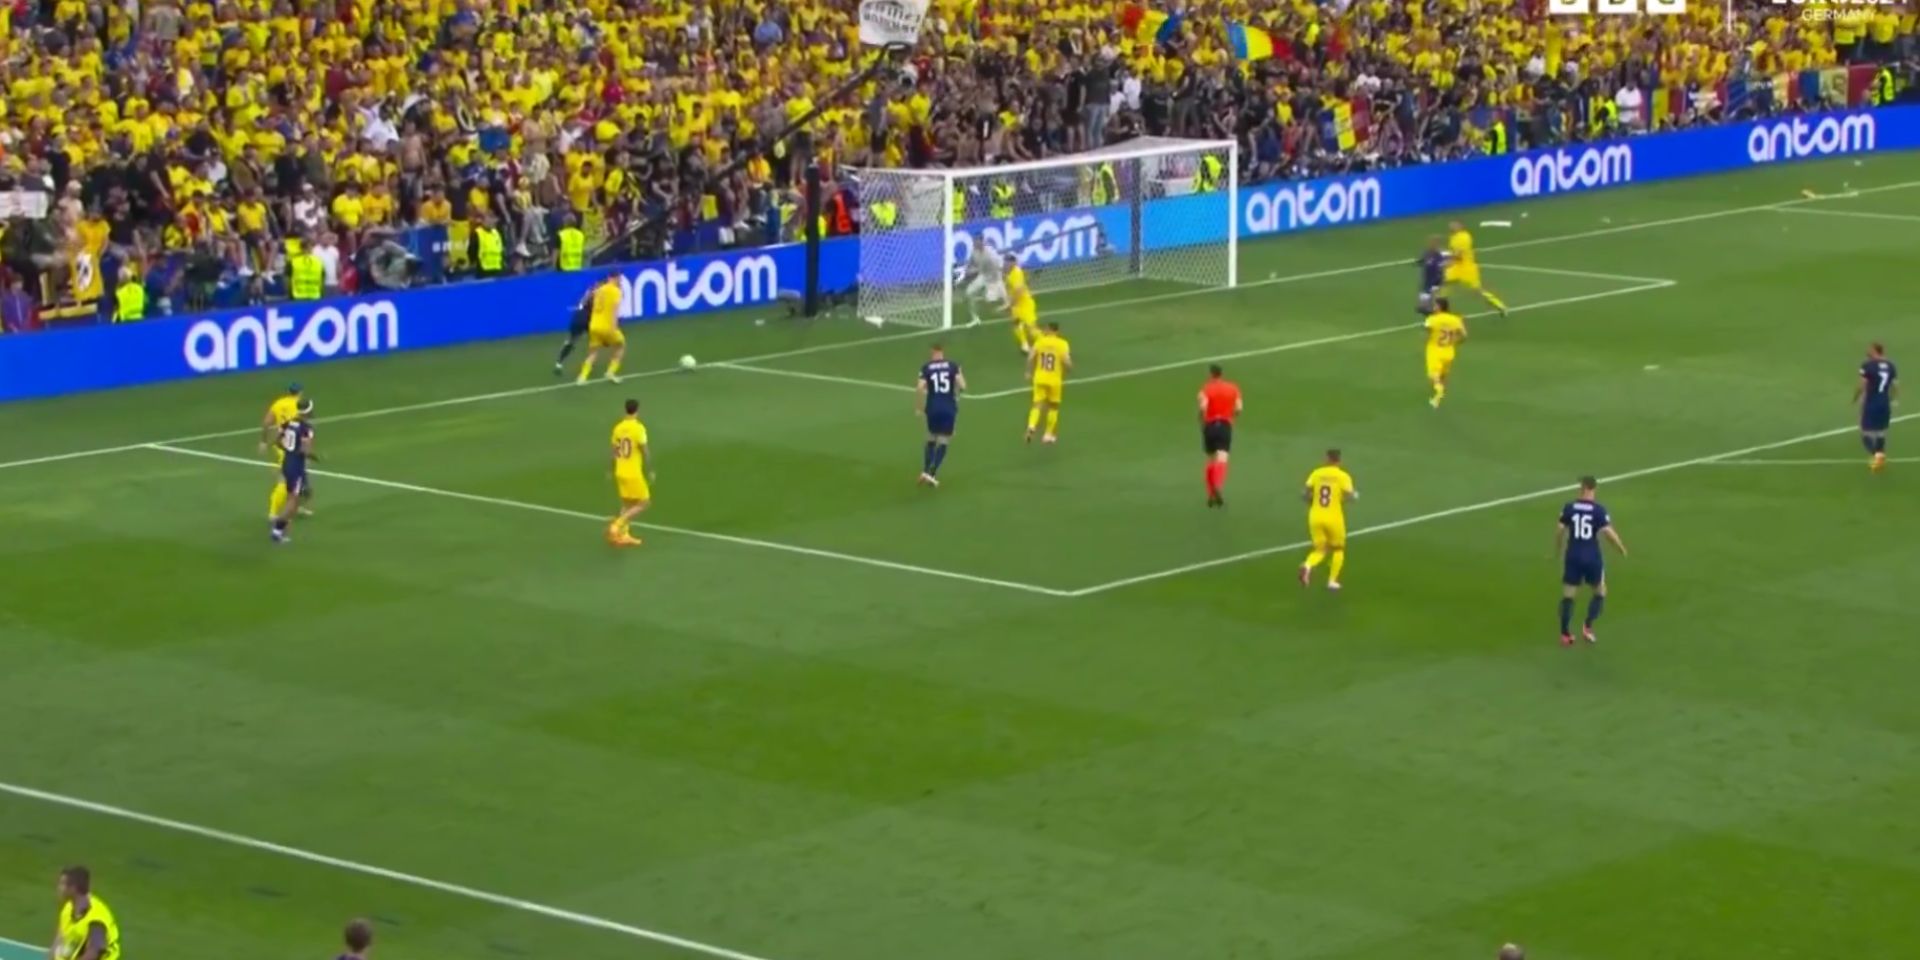 (Video) Gakpo continues to wow at the Euros with double goal involvement